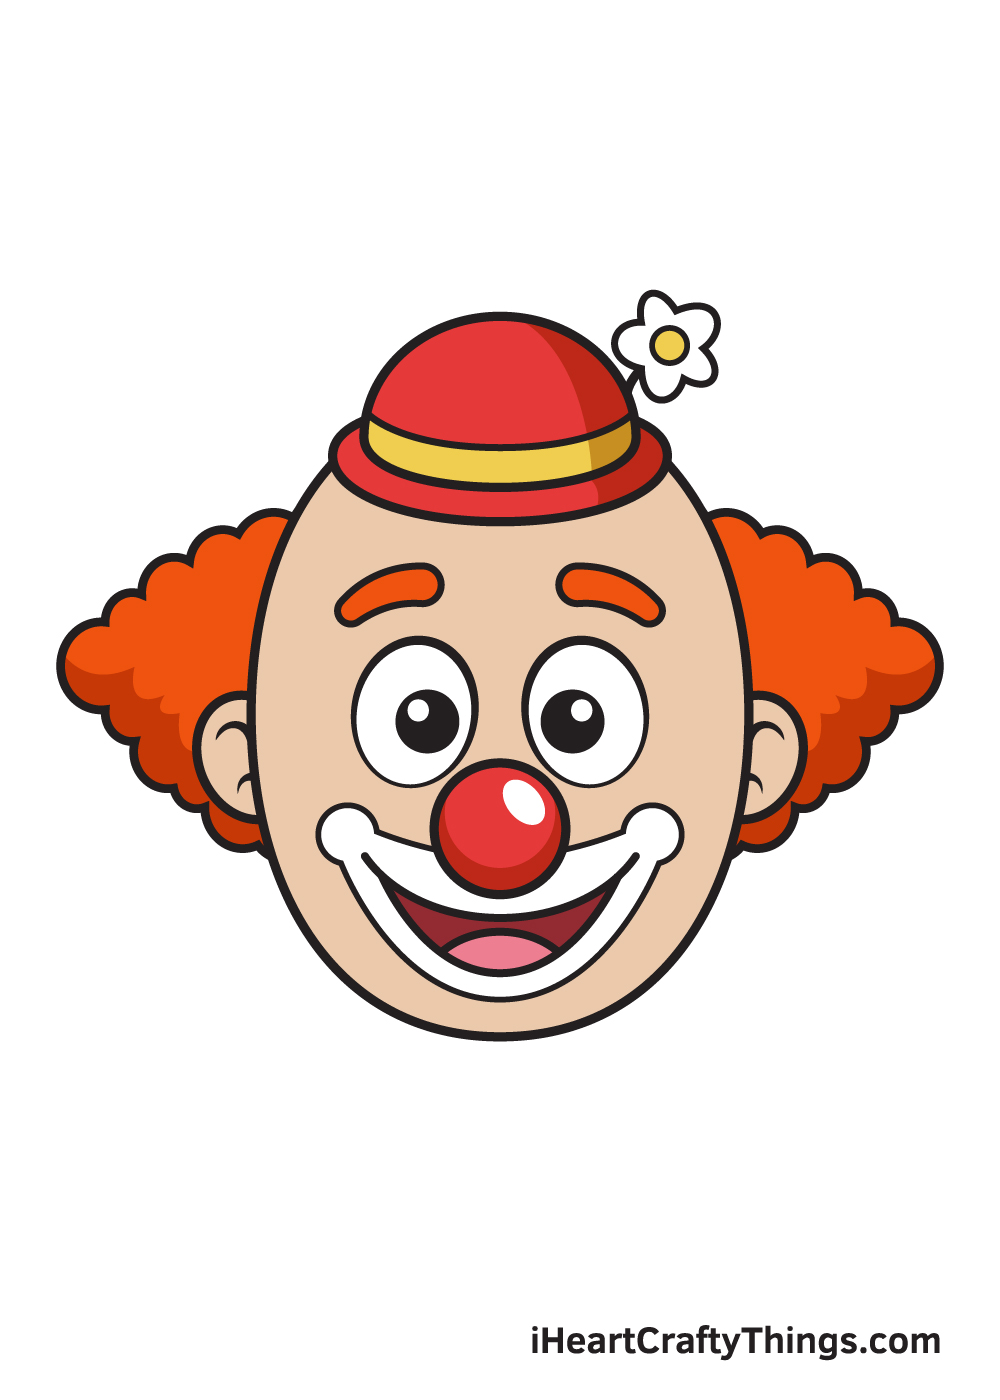 Clown Drawing - How To Draw A Clown Step By Step